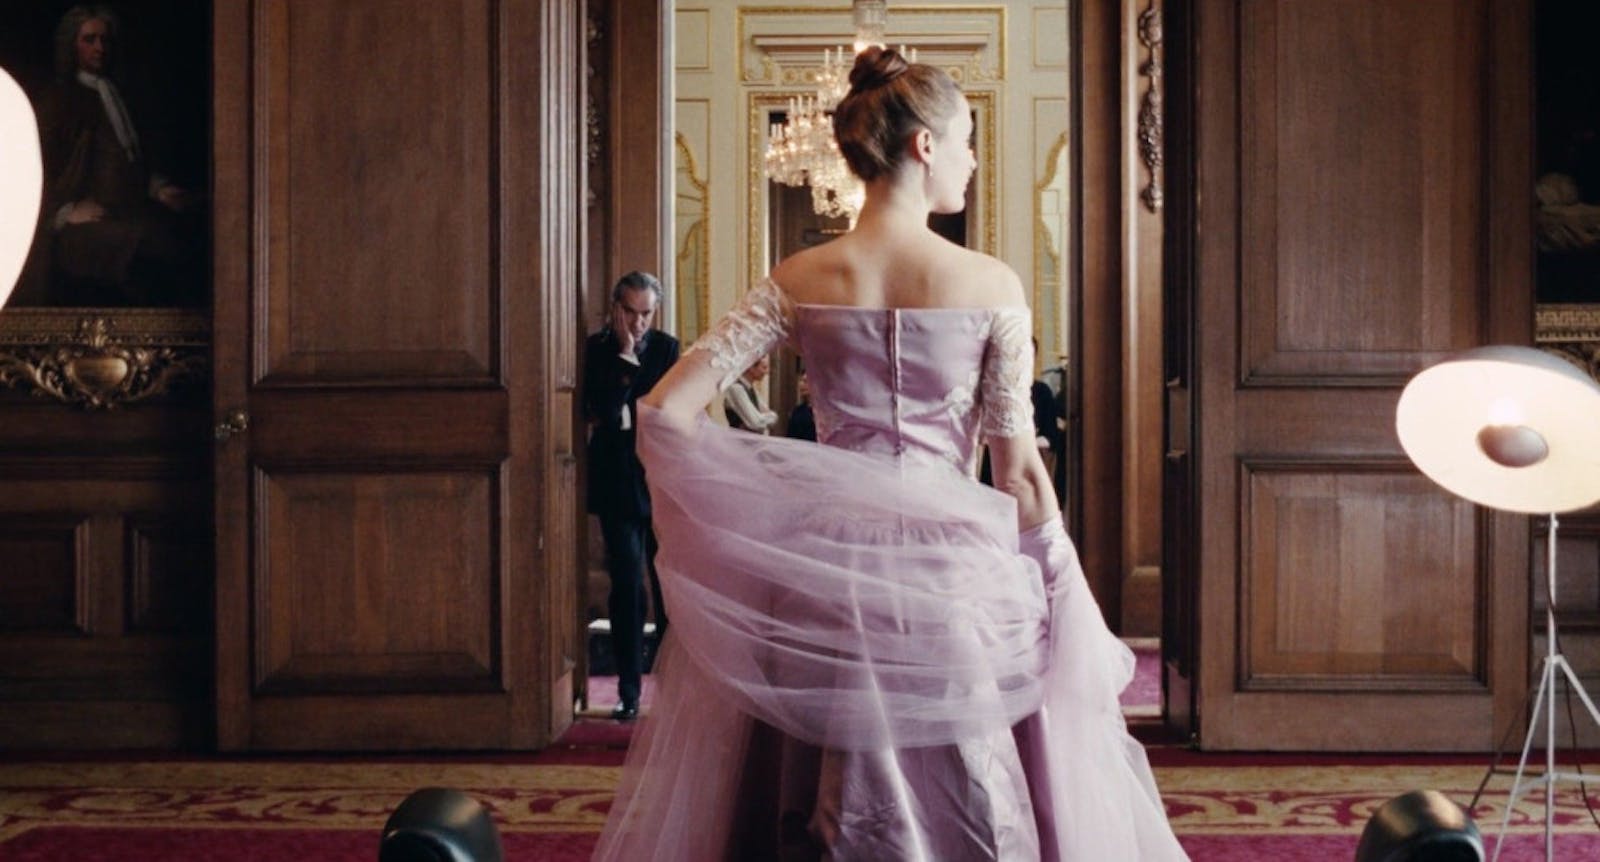 Paul Thomas Anderson's 'Phantom Thread' is a ghost in disguise